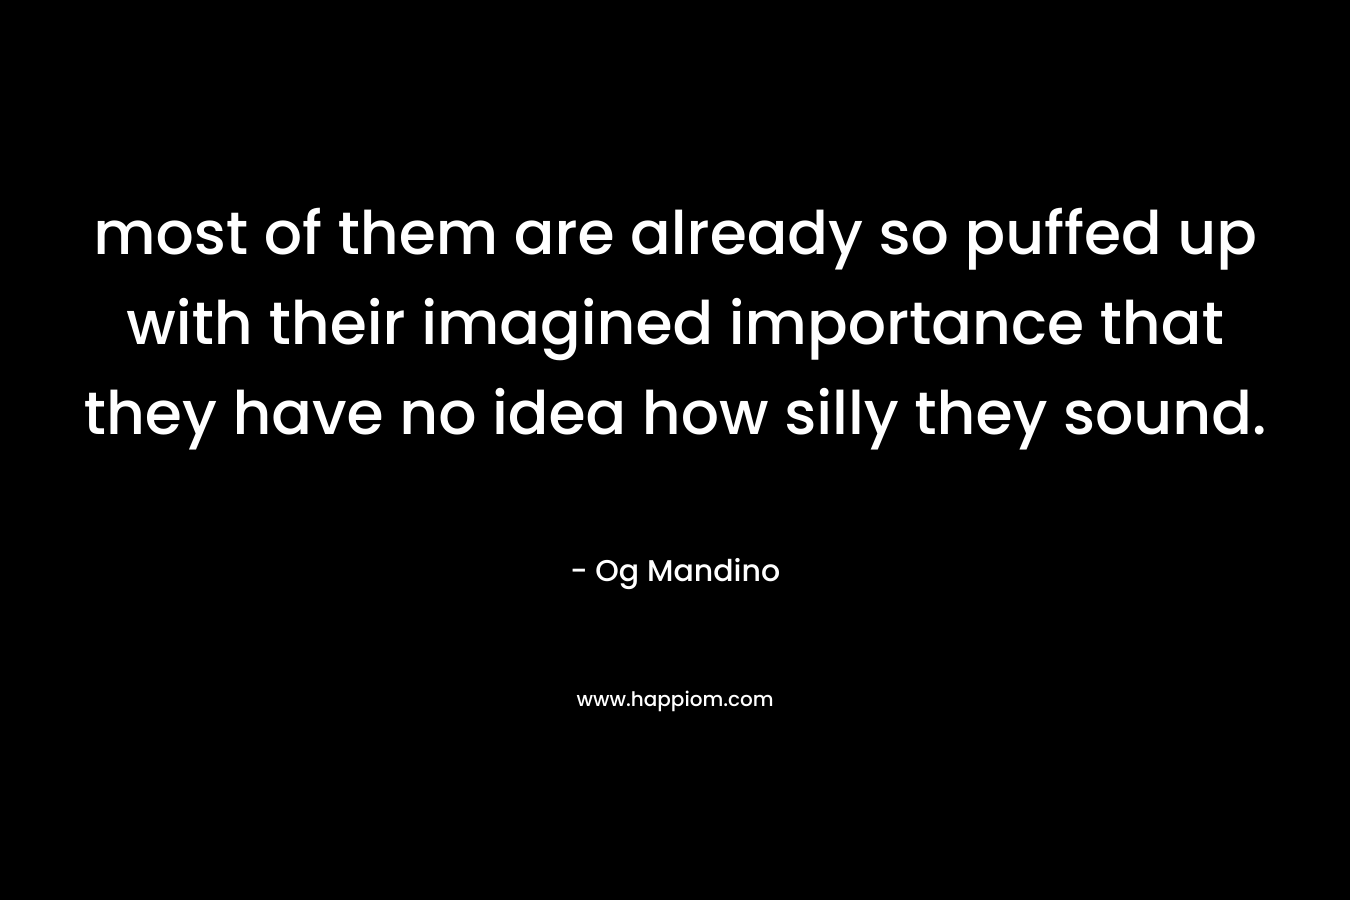 most of them are already so puffed up with their imagined importance that they have no idea how silly they sound. – Og Mandino